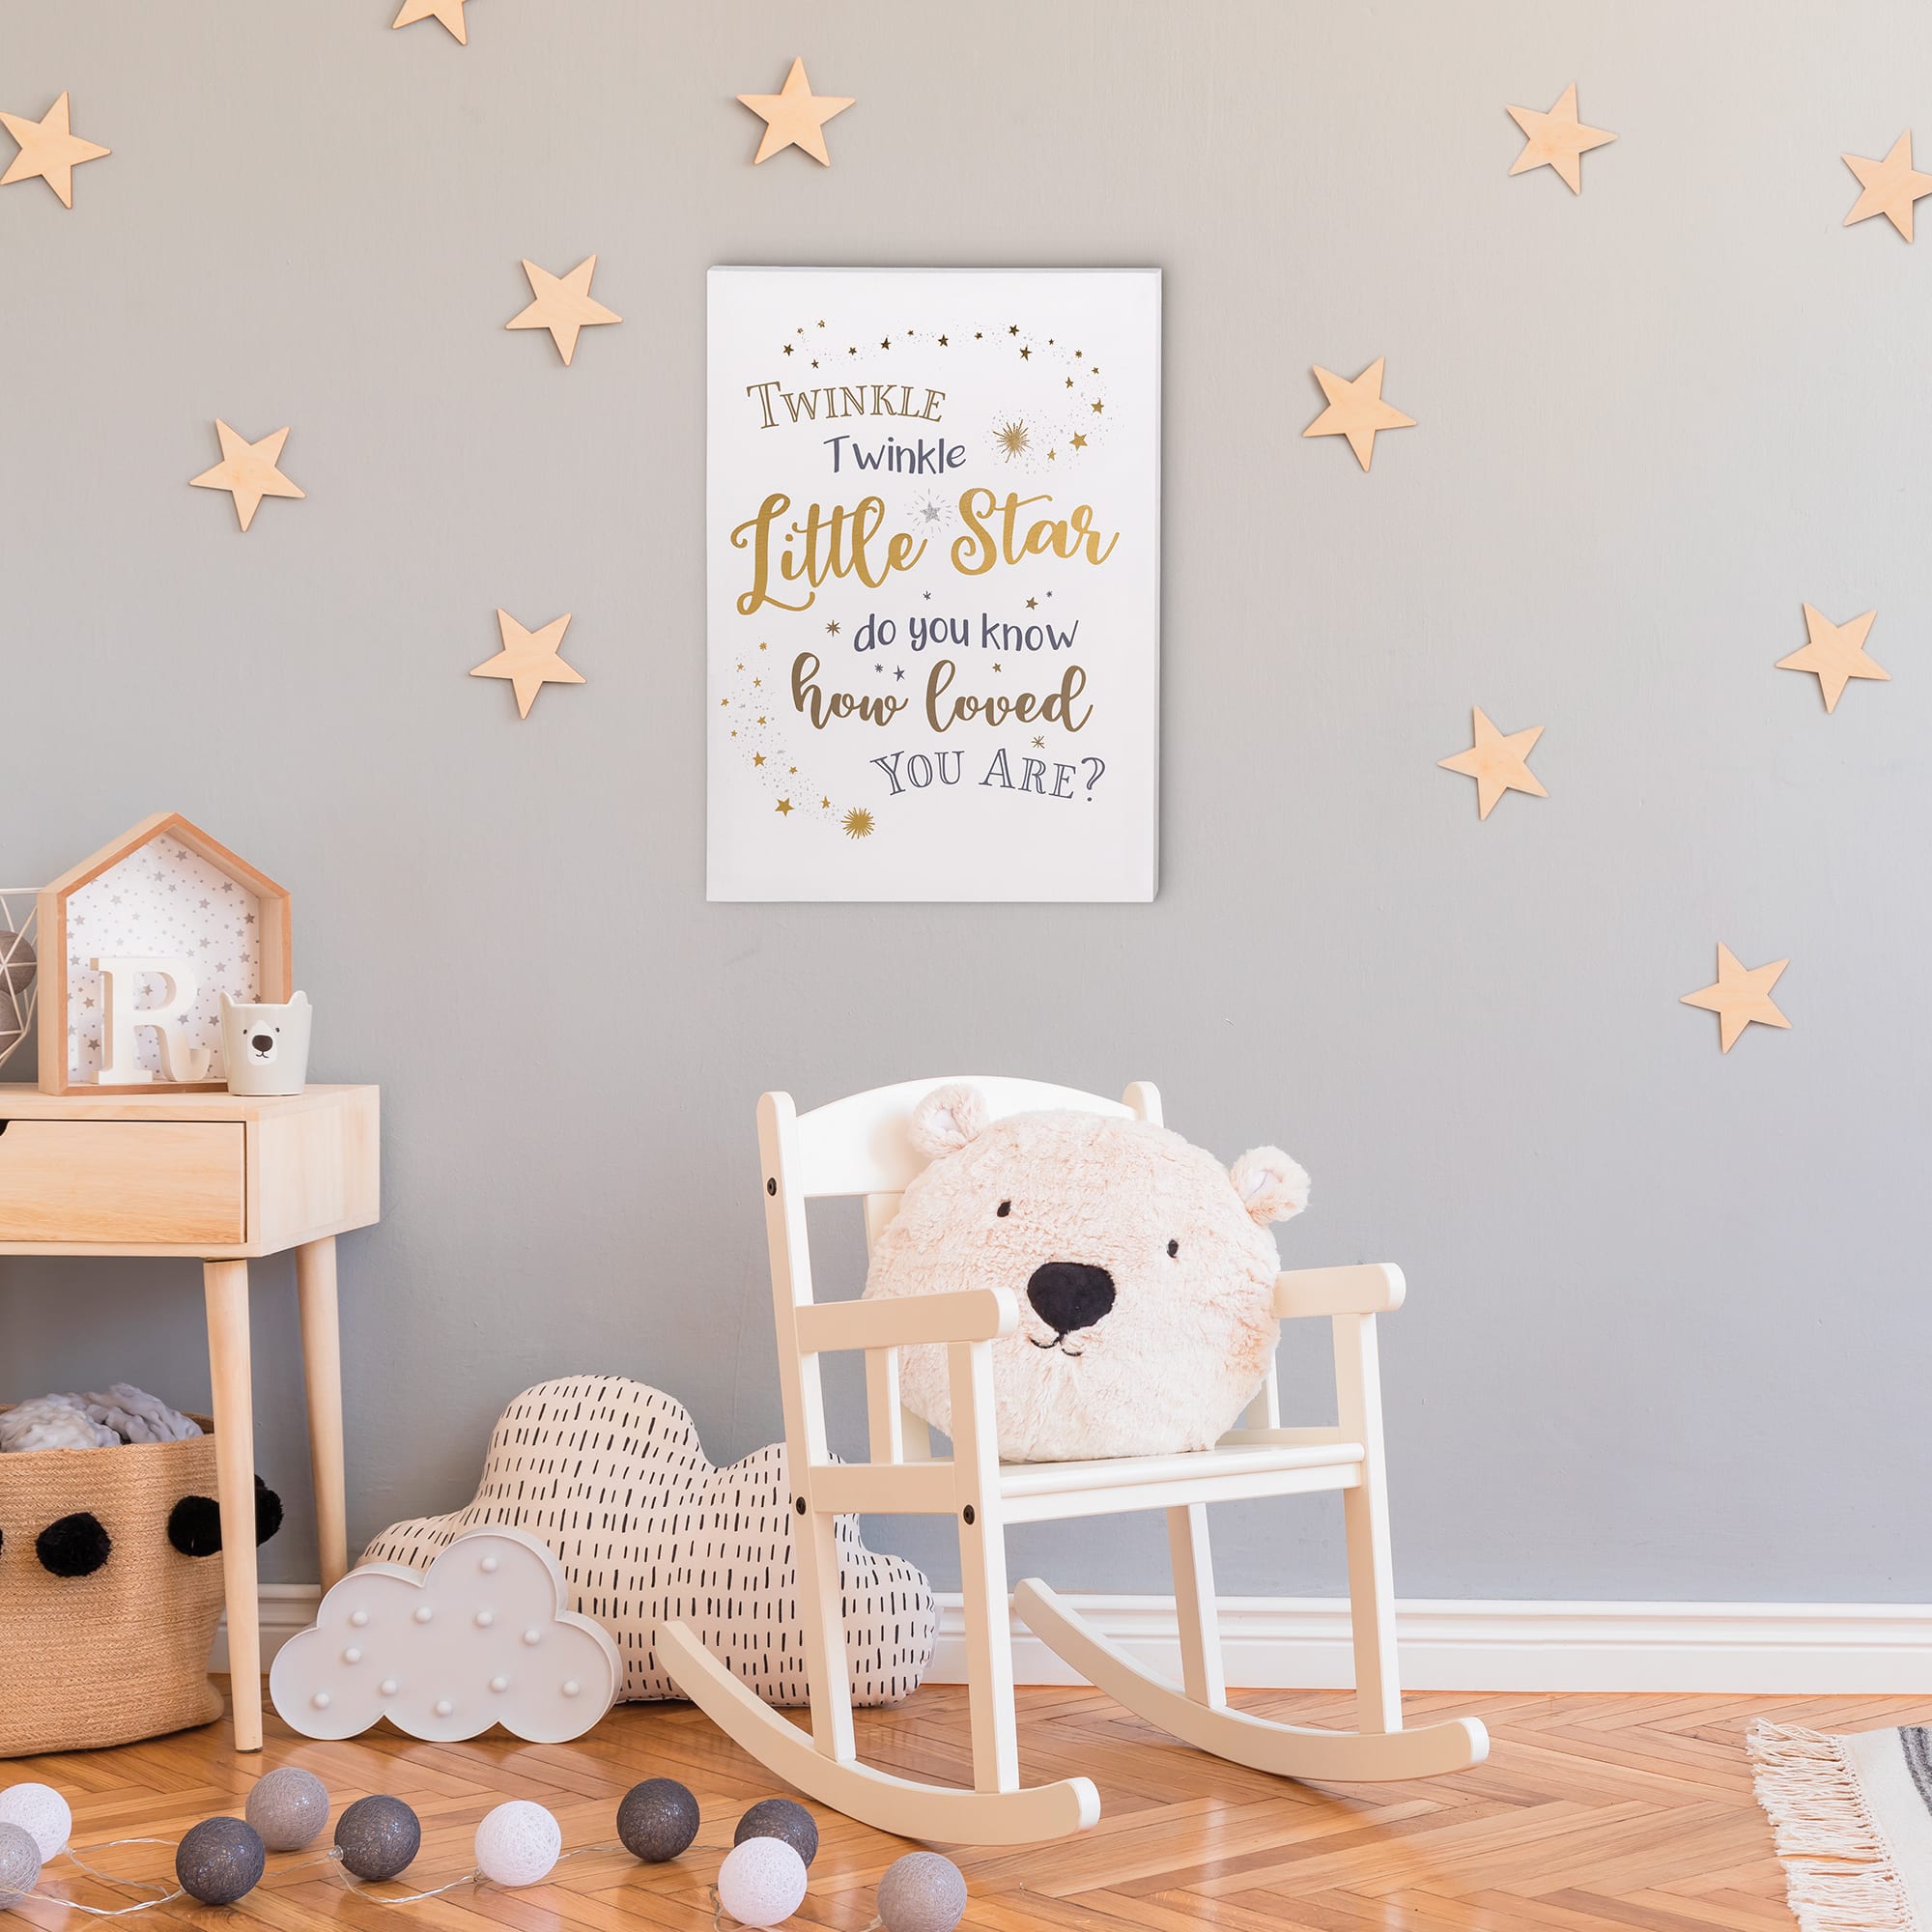 Baby Room Home Decor Twinkle Twinkle Little Star Wood Sign